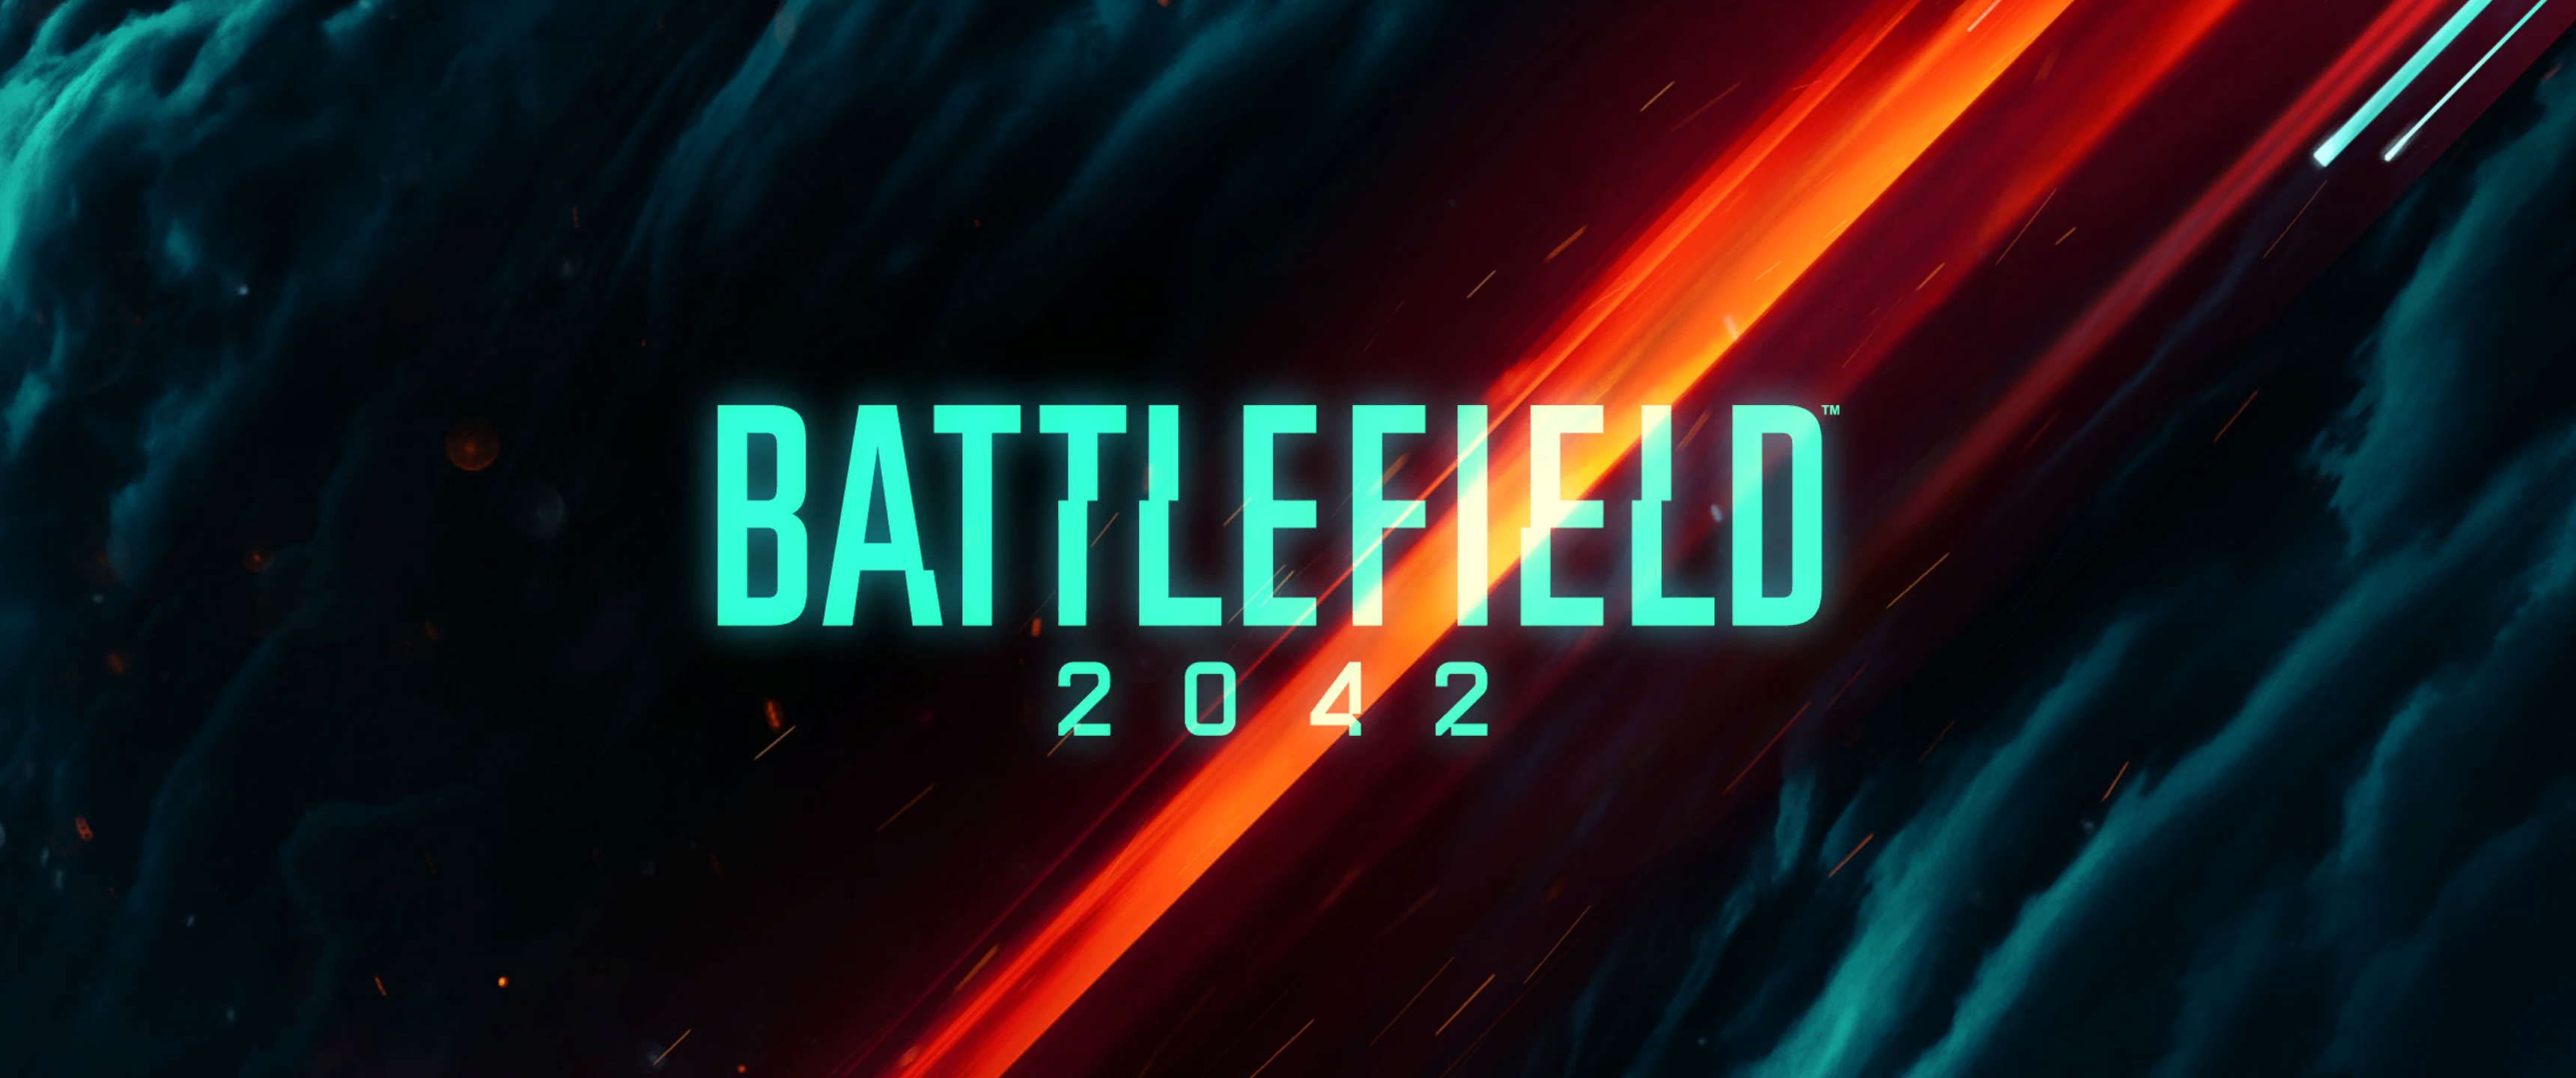 General 3440x1440 Battlefield 2042 Battlefield (game) video games EA DICE Electronic Arts first-person shooter